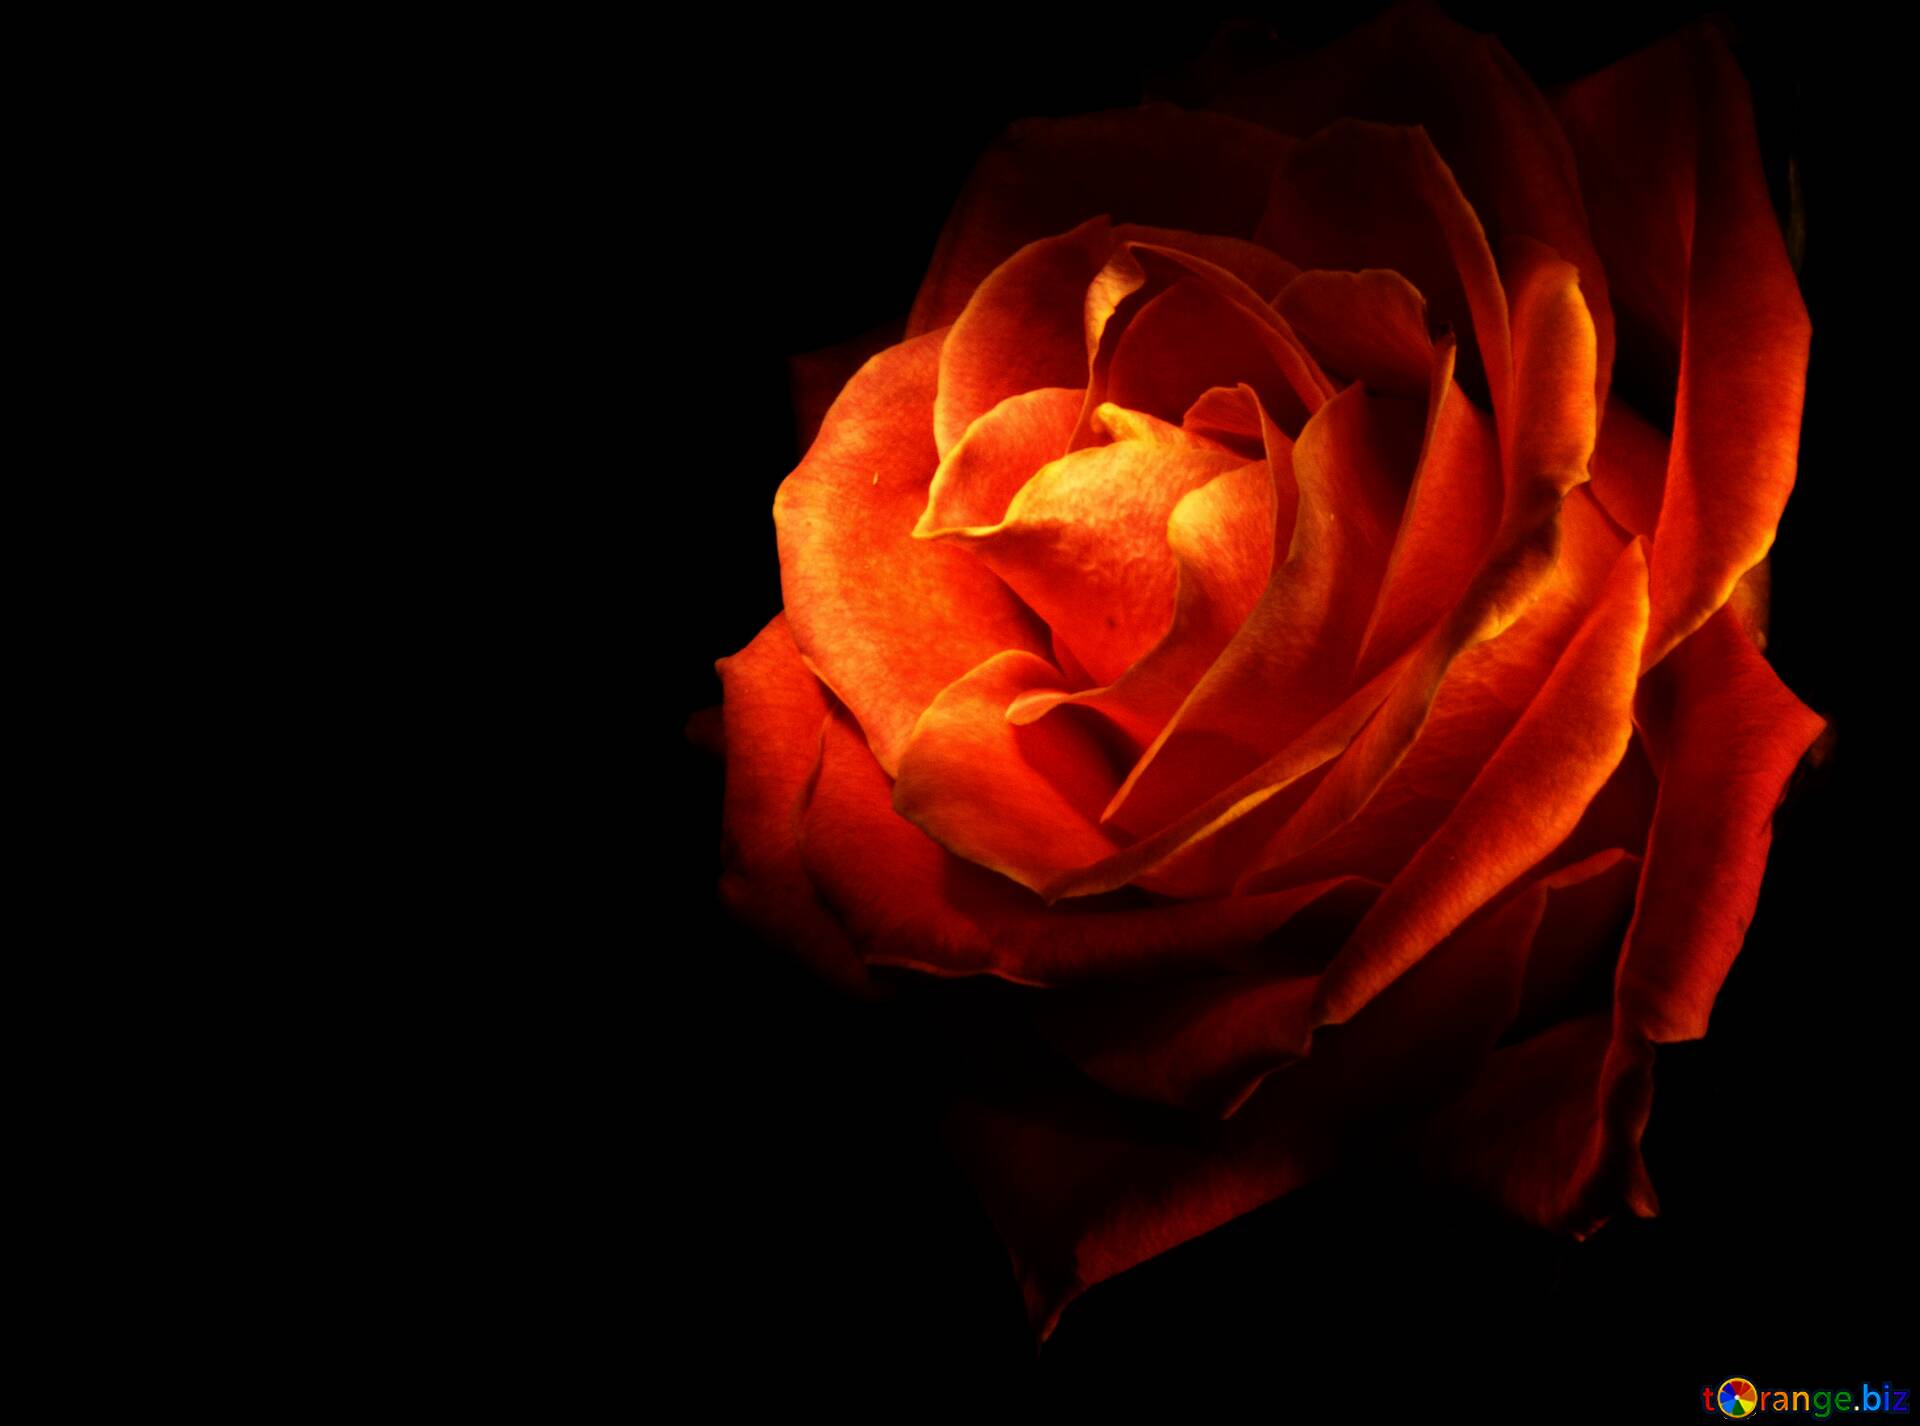 Love is on Fire by SonjaPhotography on deviantART  Rose on fire Fire  photography Fire art